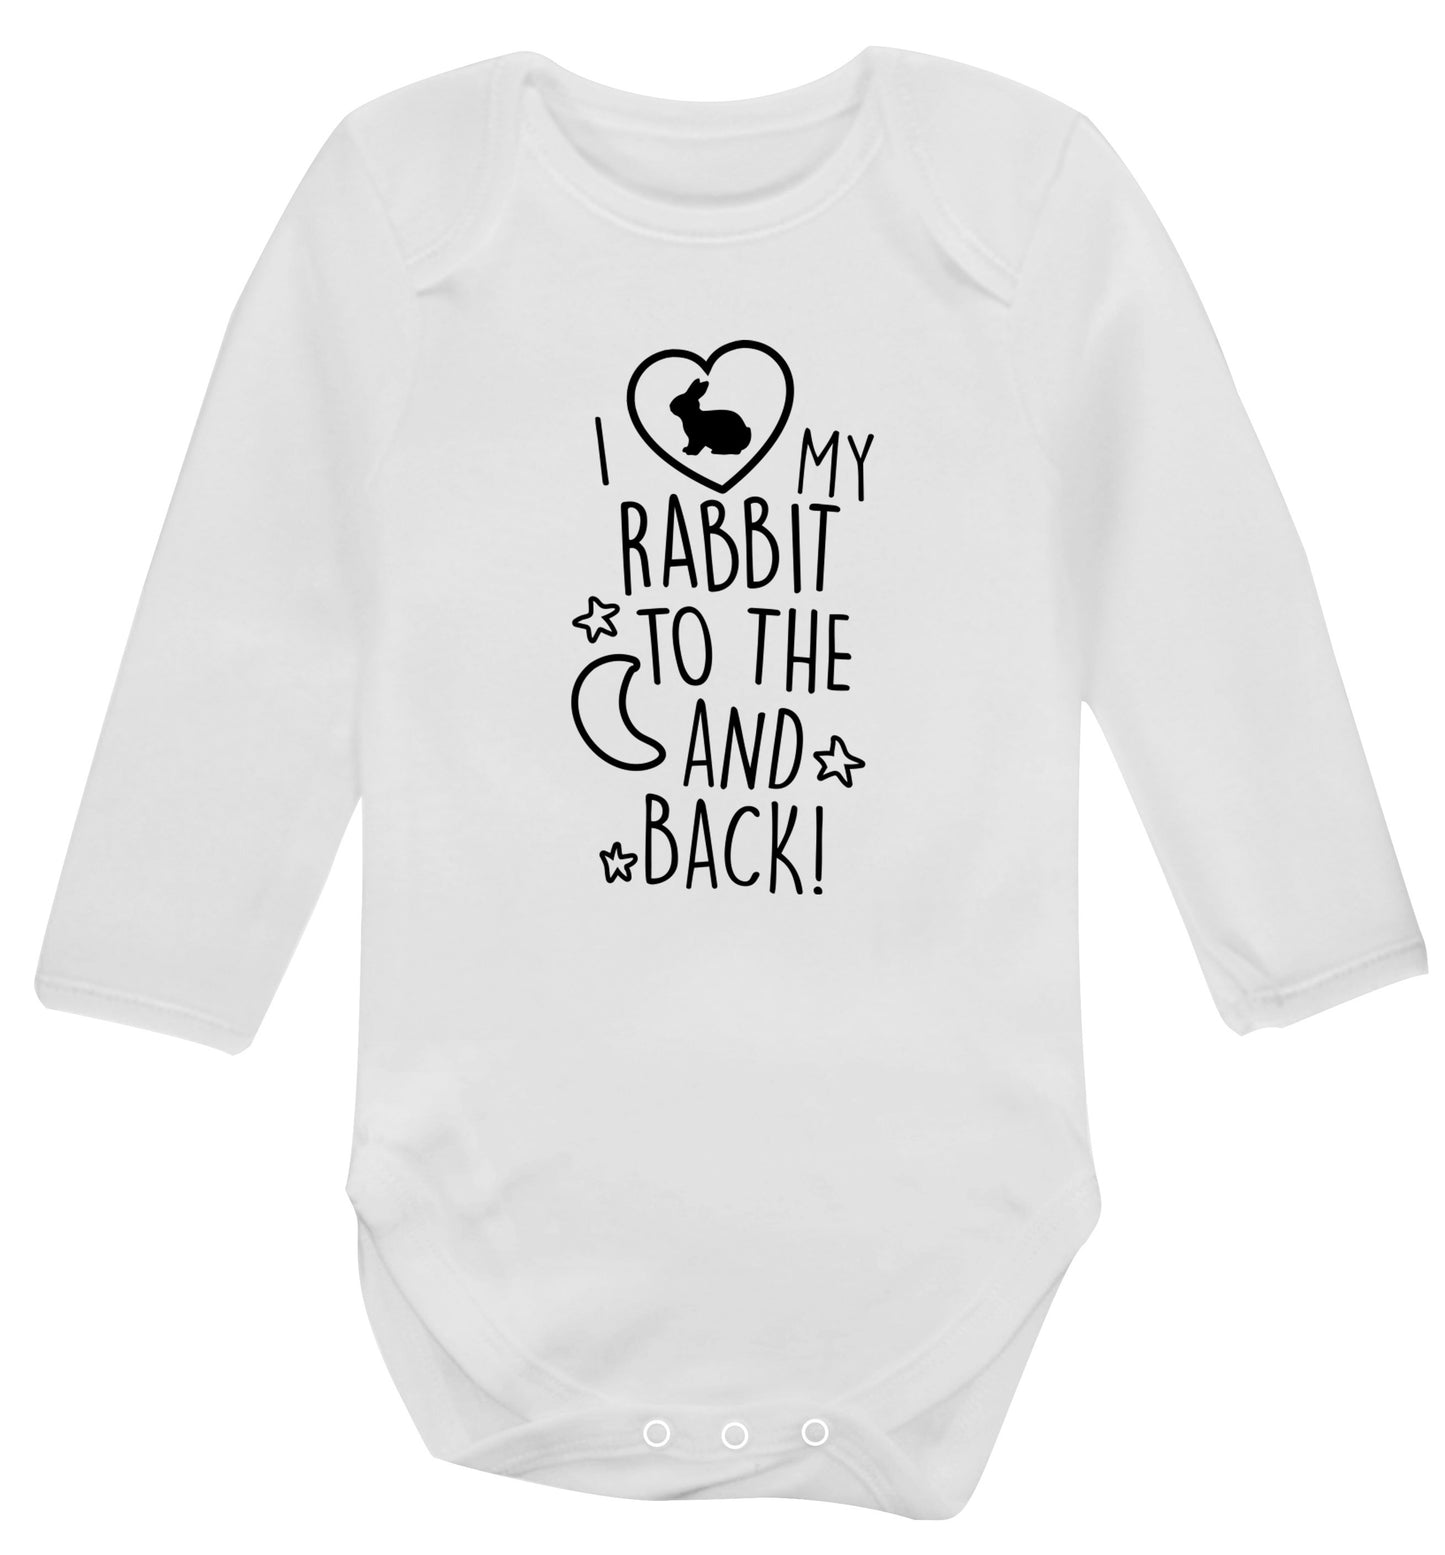 I love my rabbit to the moon and back Baby Vest long sleeved white 6-12 months